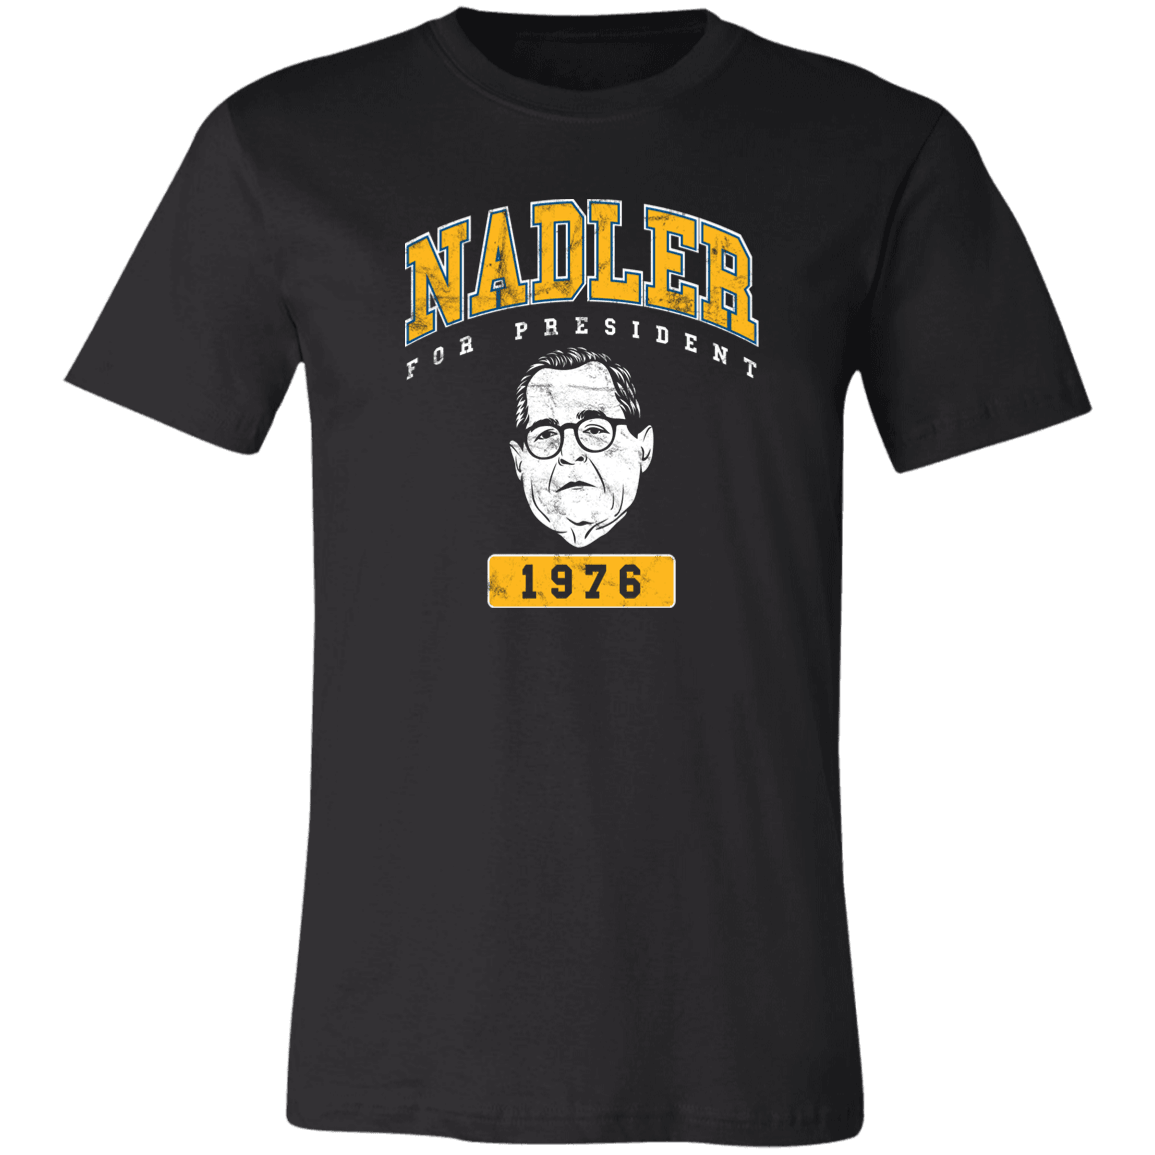 Designs by MyUtopia Shout Out:Nadler For President Unisex Jersey Short-Sleeve T-Shirt,X-Small / Black,T-Shirts